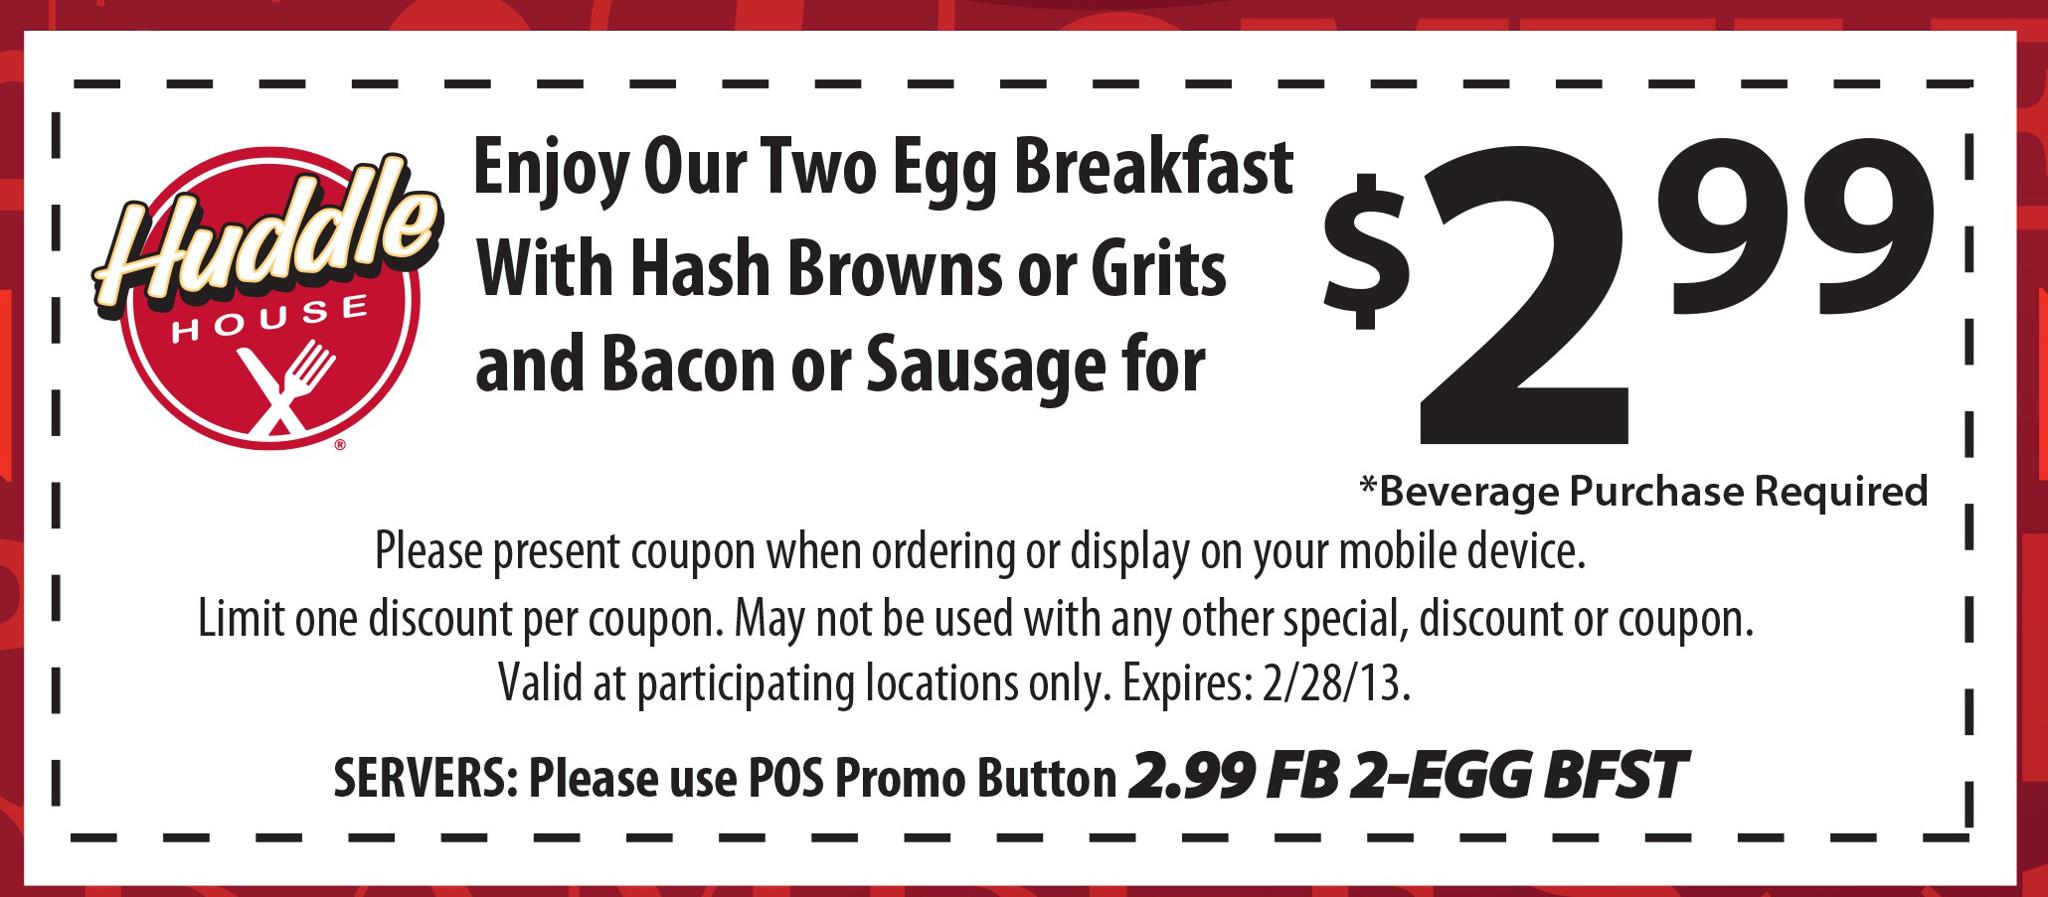 Huddle House Promo Coupon Codes and Printable Coupons